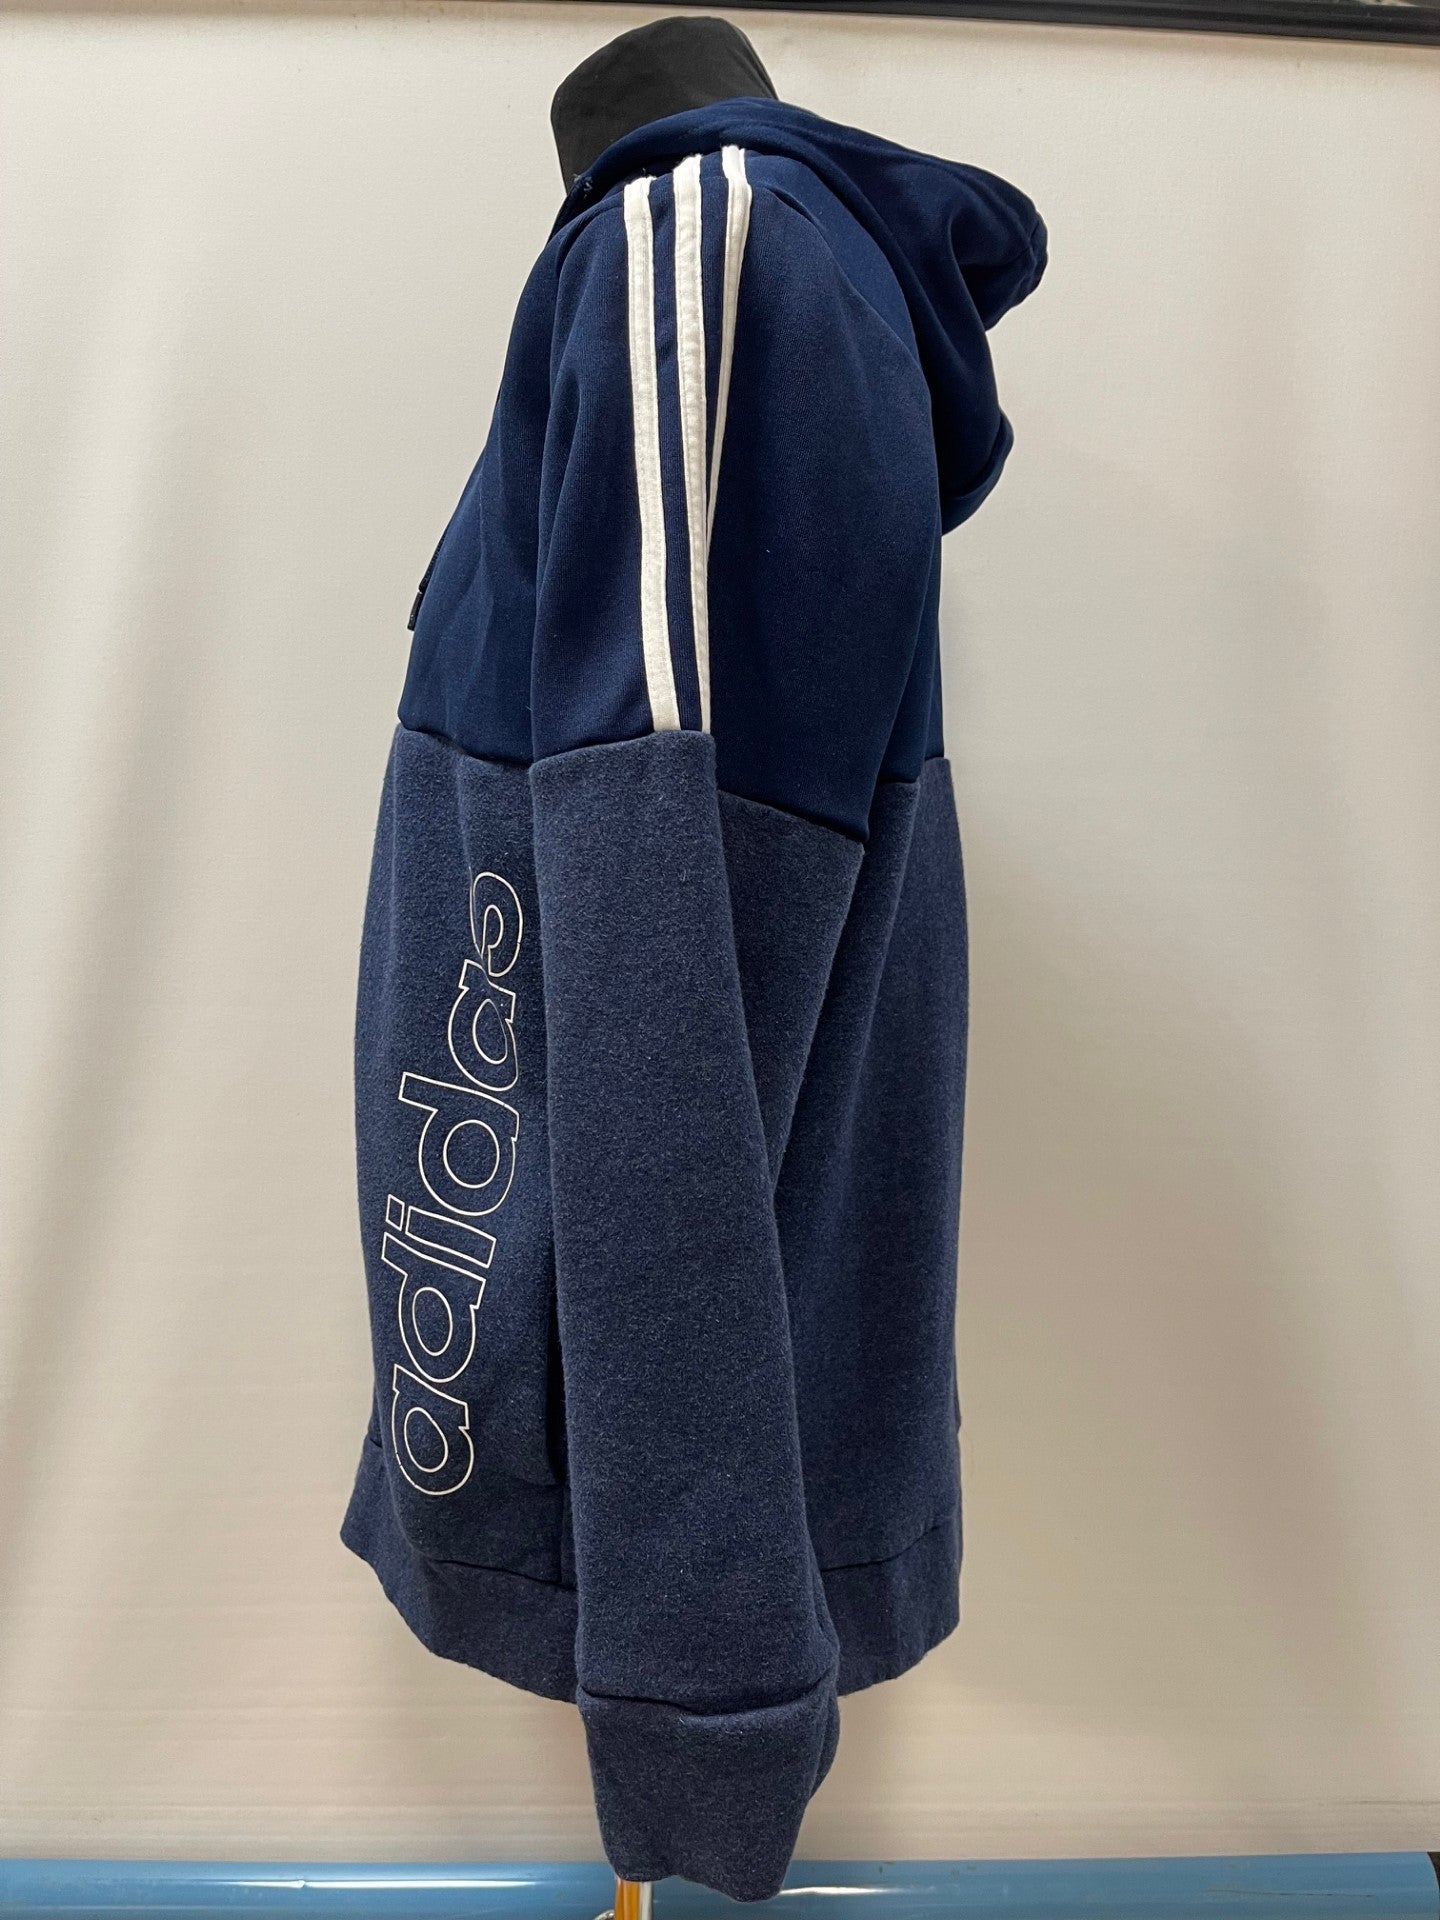 Adidas Blue and White Zip Hoodie XL